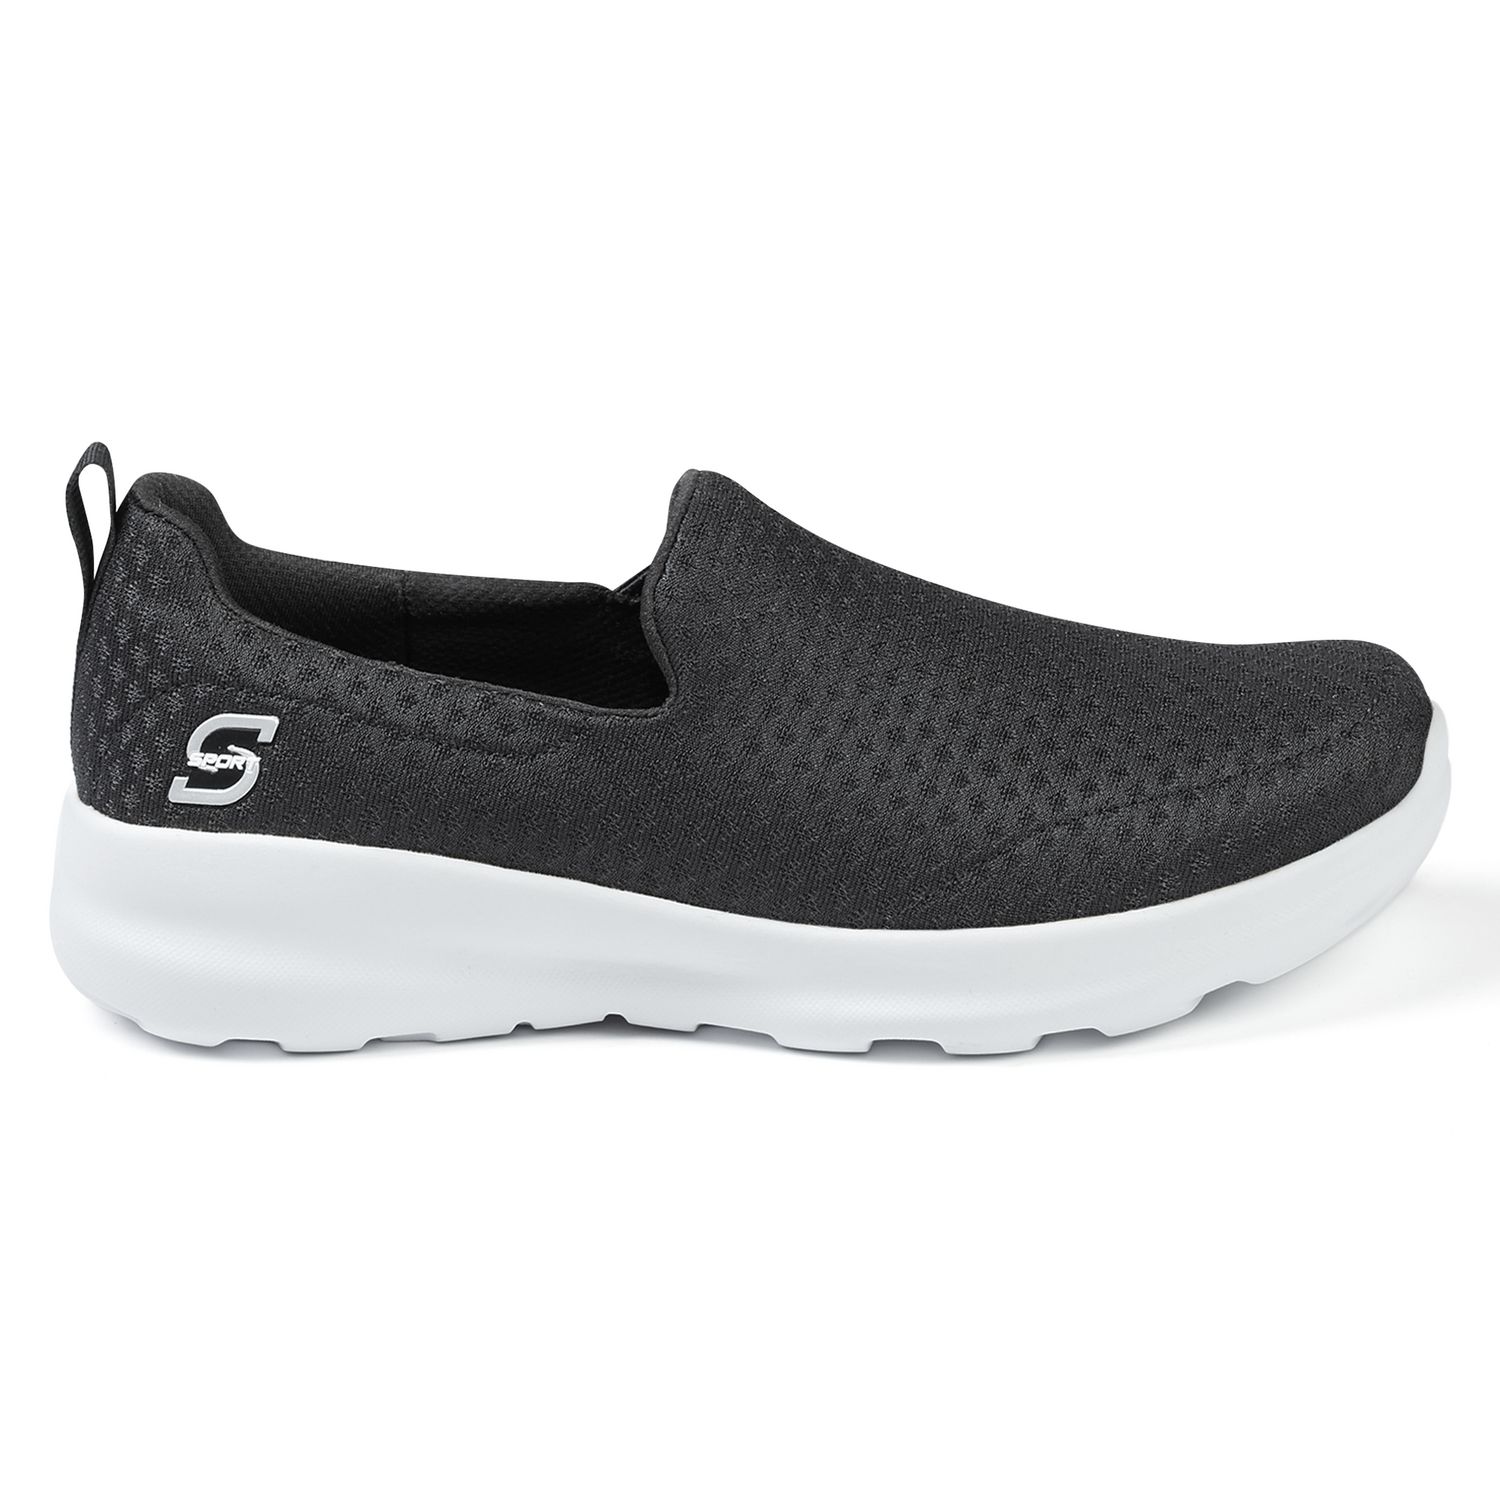 S Sport By Skechers : Skechers Official Site Comfort That Performs ...